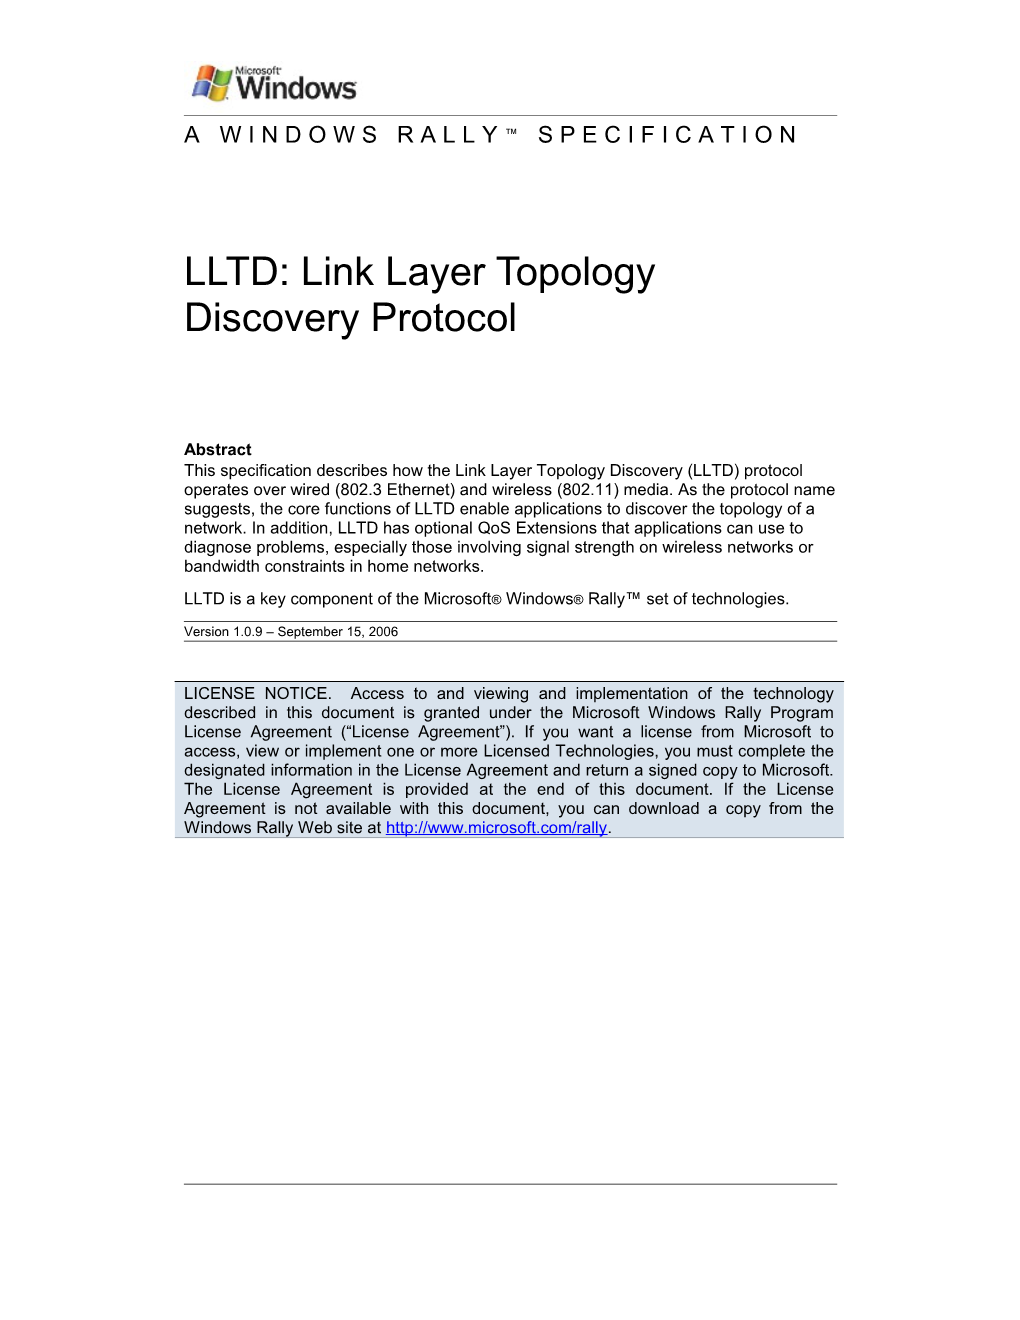 LLTD: Link Layer Topology Discovery Protocol